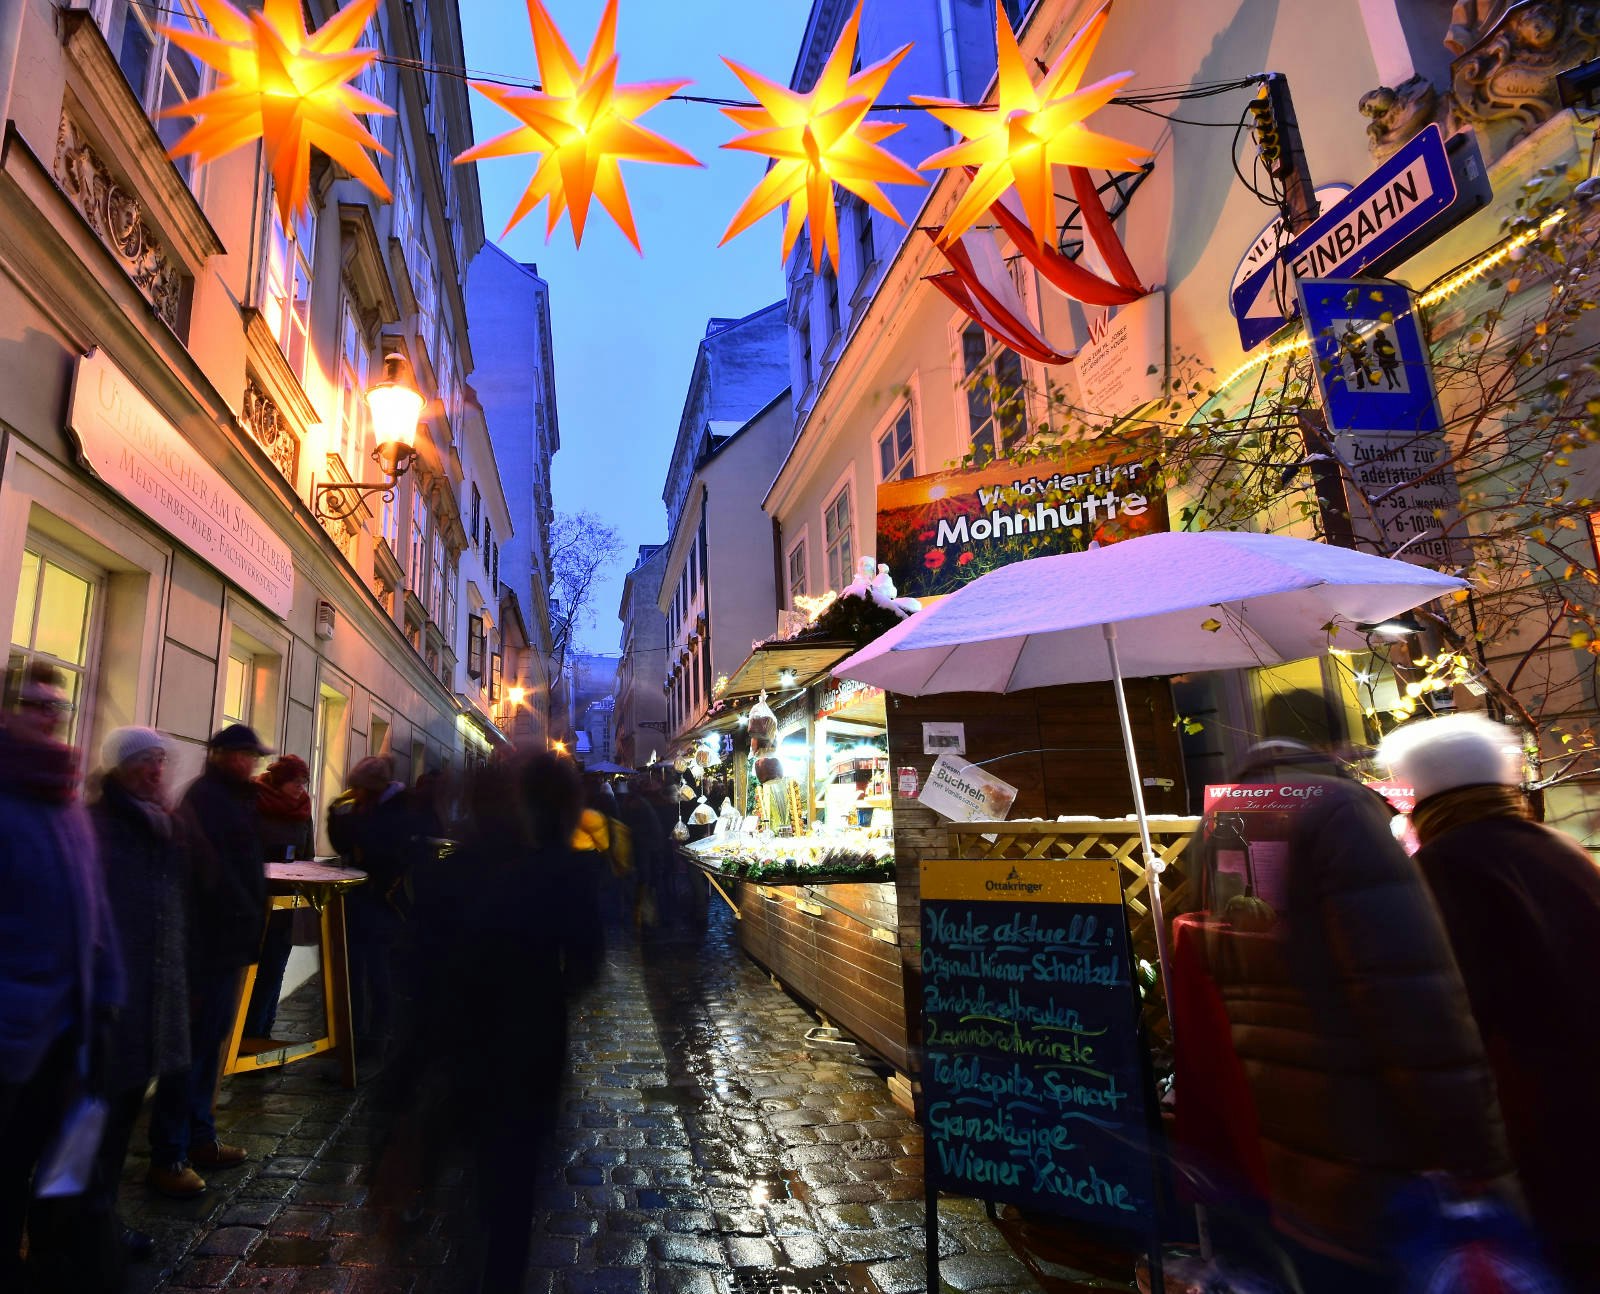 Stalls squeezed into narrow cobblestone streets. It's nearly dark and has been raining and there are star-shaped lights hanging overhead.